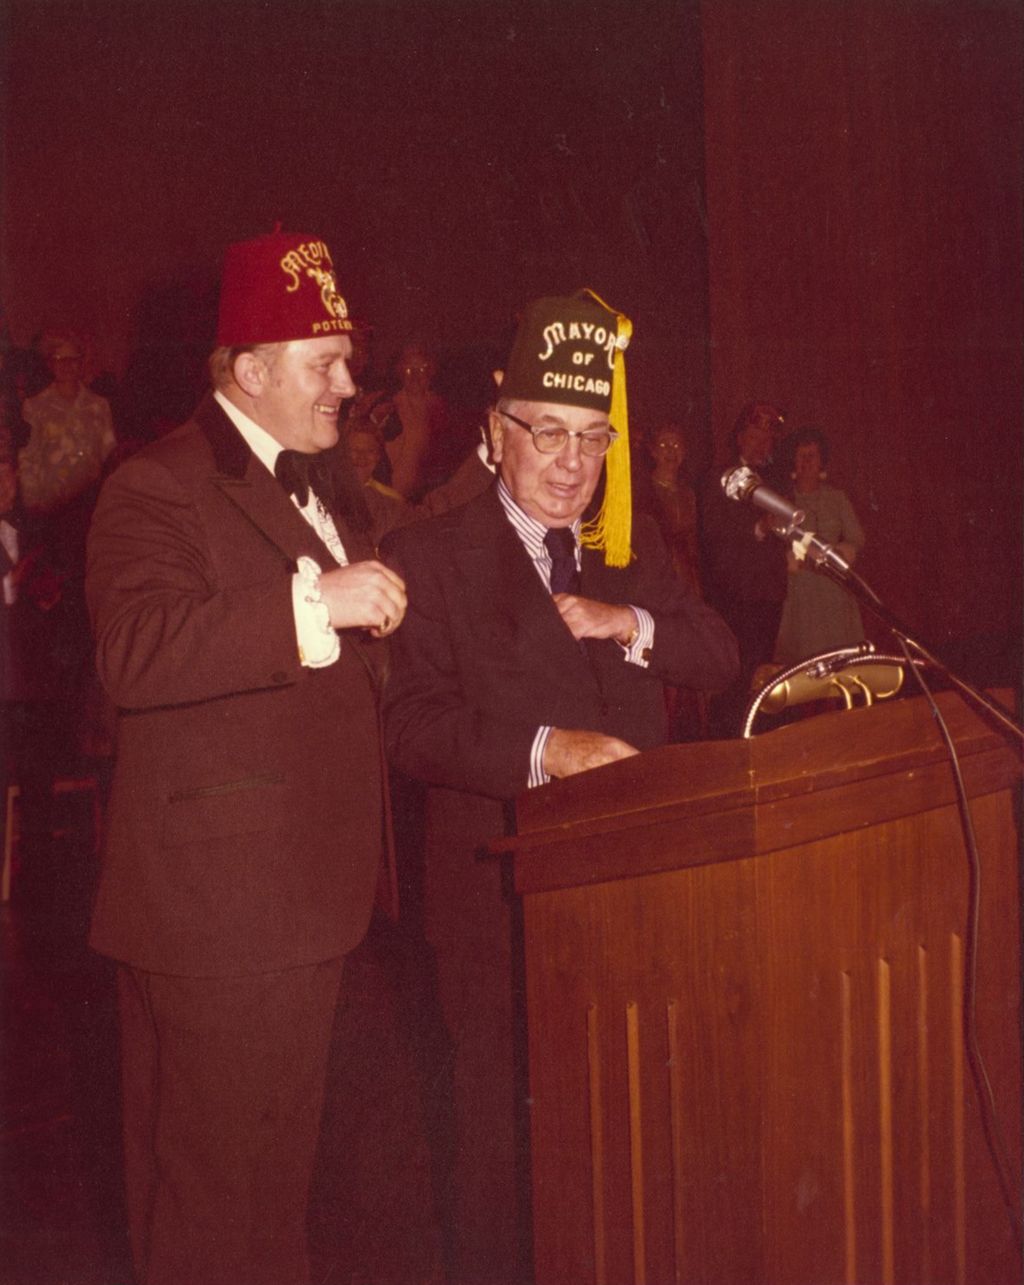 Miniature of Richard J. Daley at a podium at a Shriners event